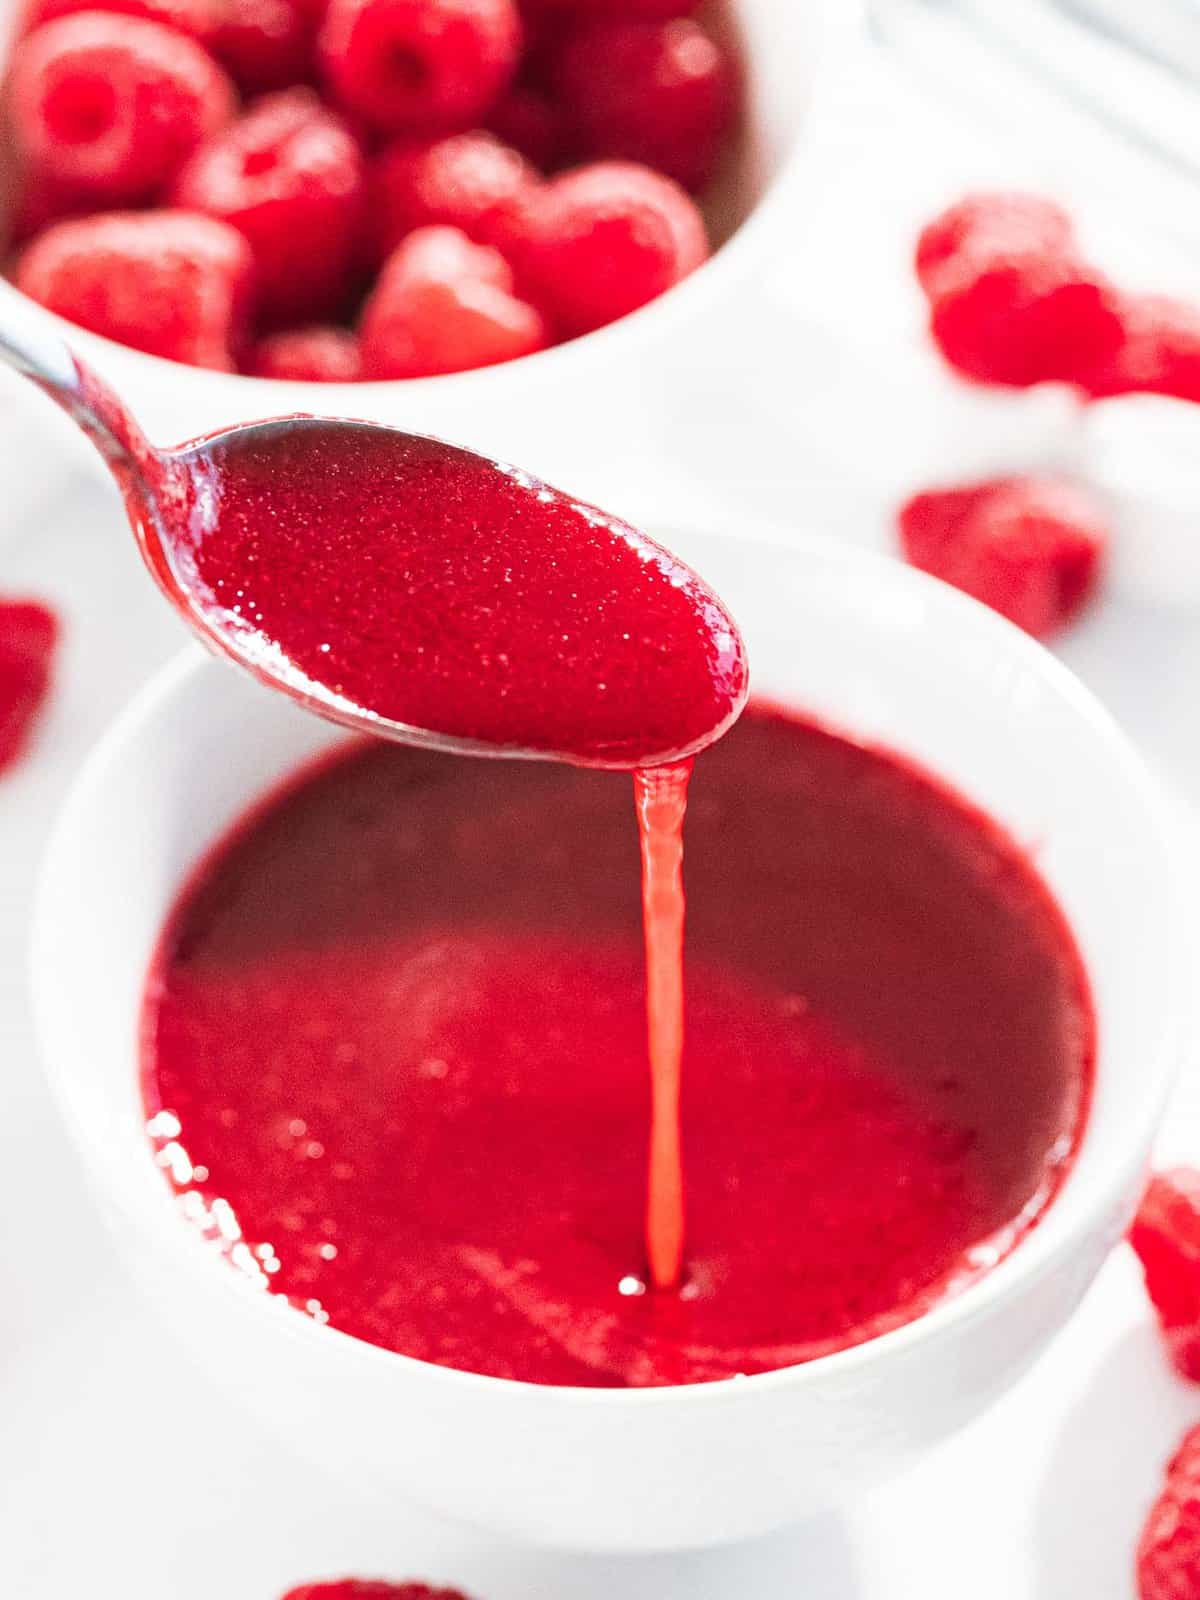 Raspberry sauce poured off a spoon to show smooth texture.